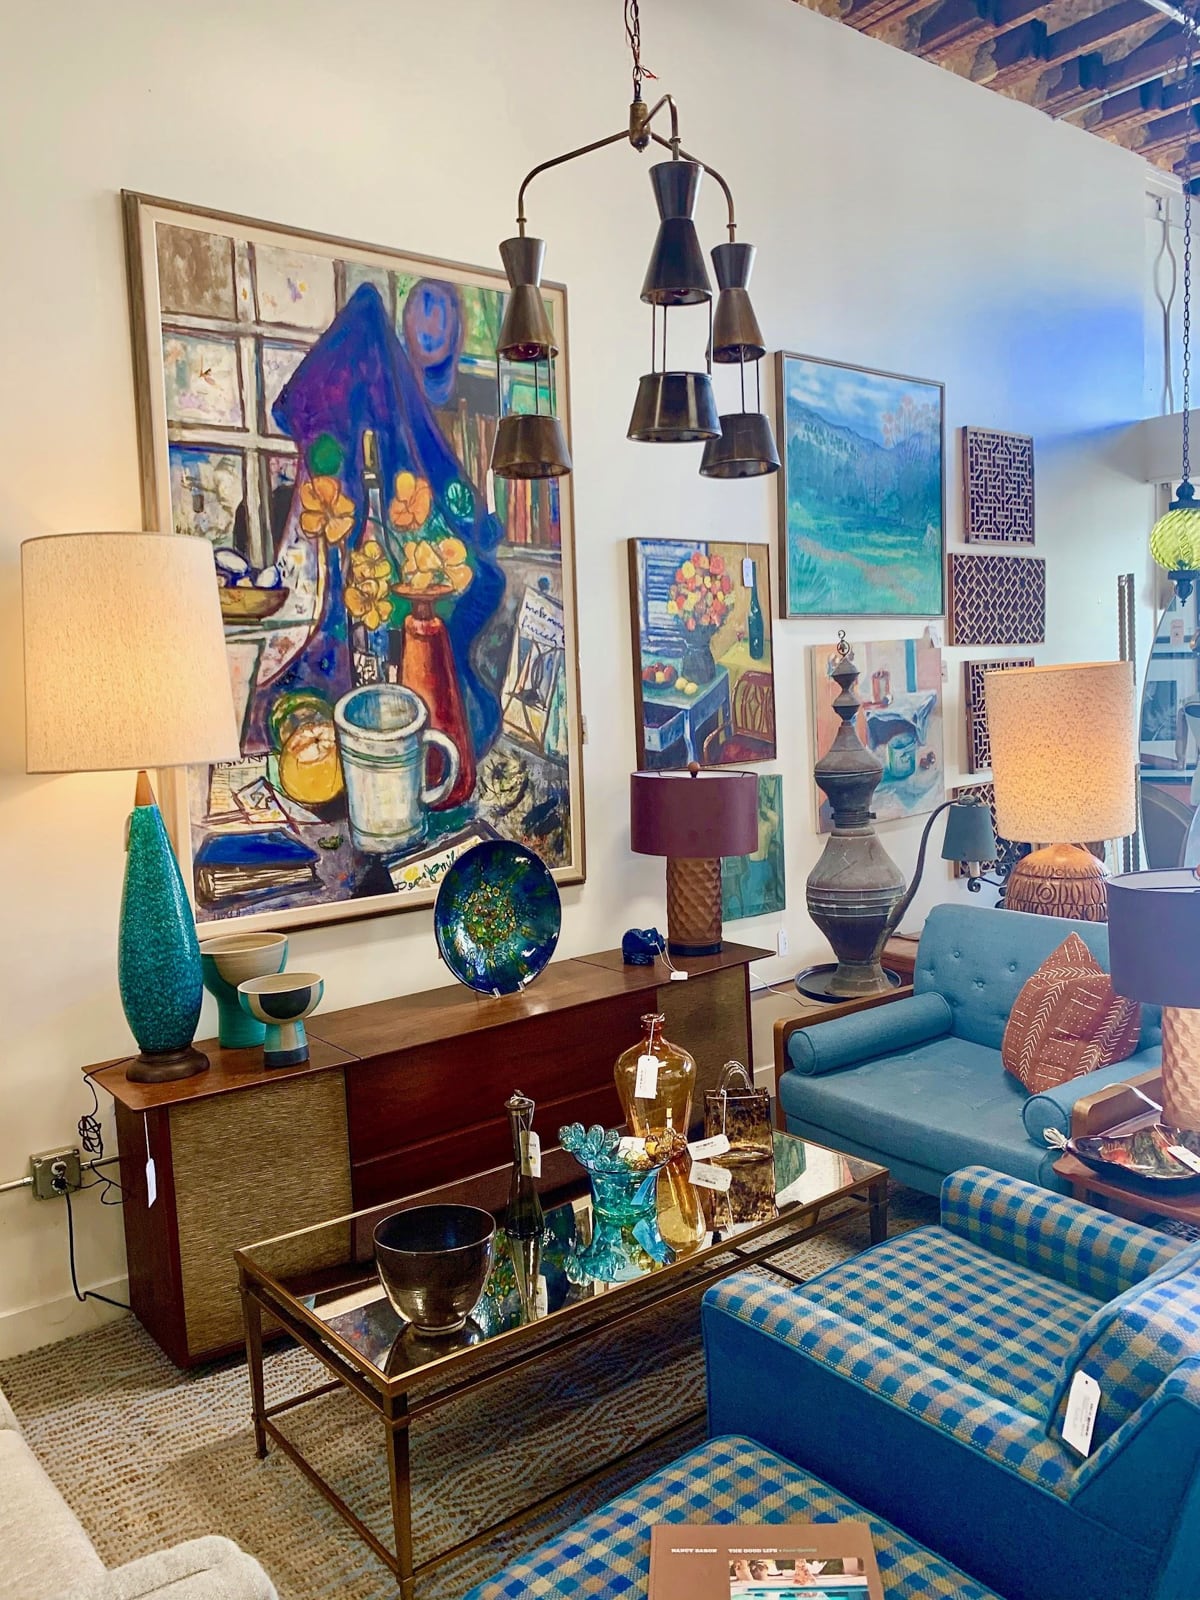 Blue armchairs, painting, and blue lamps